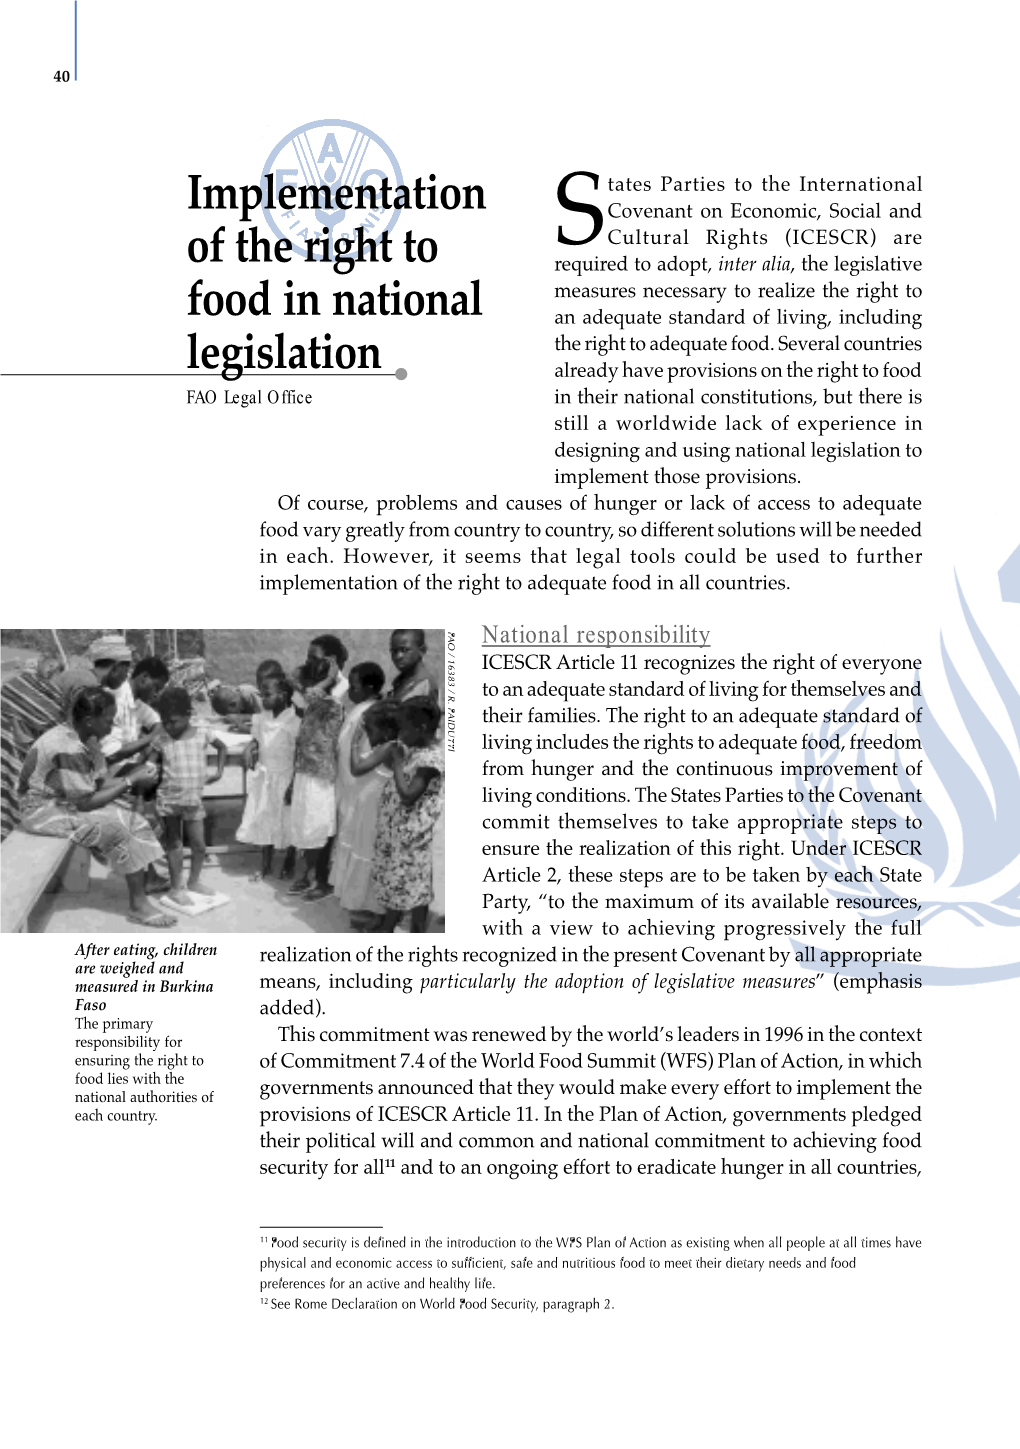 Implementation of the Right to Food in National Legislation